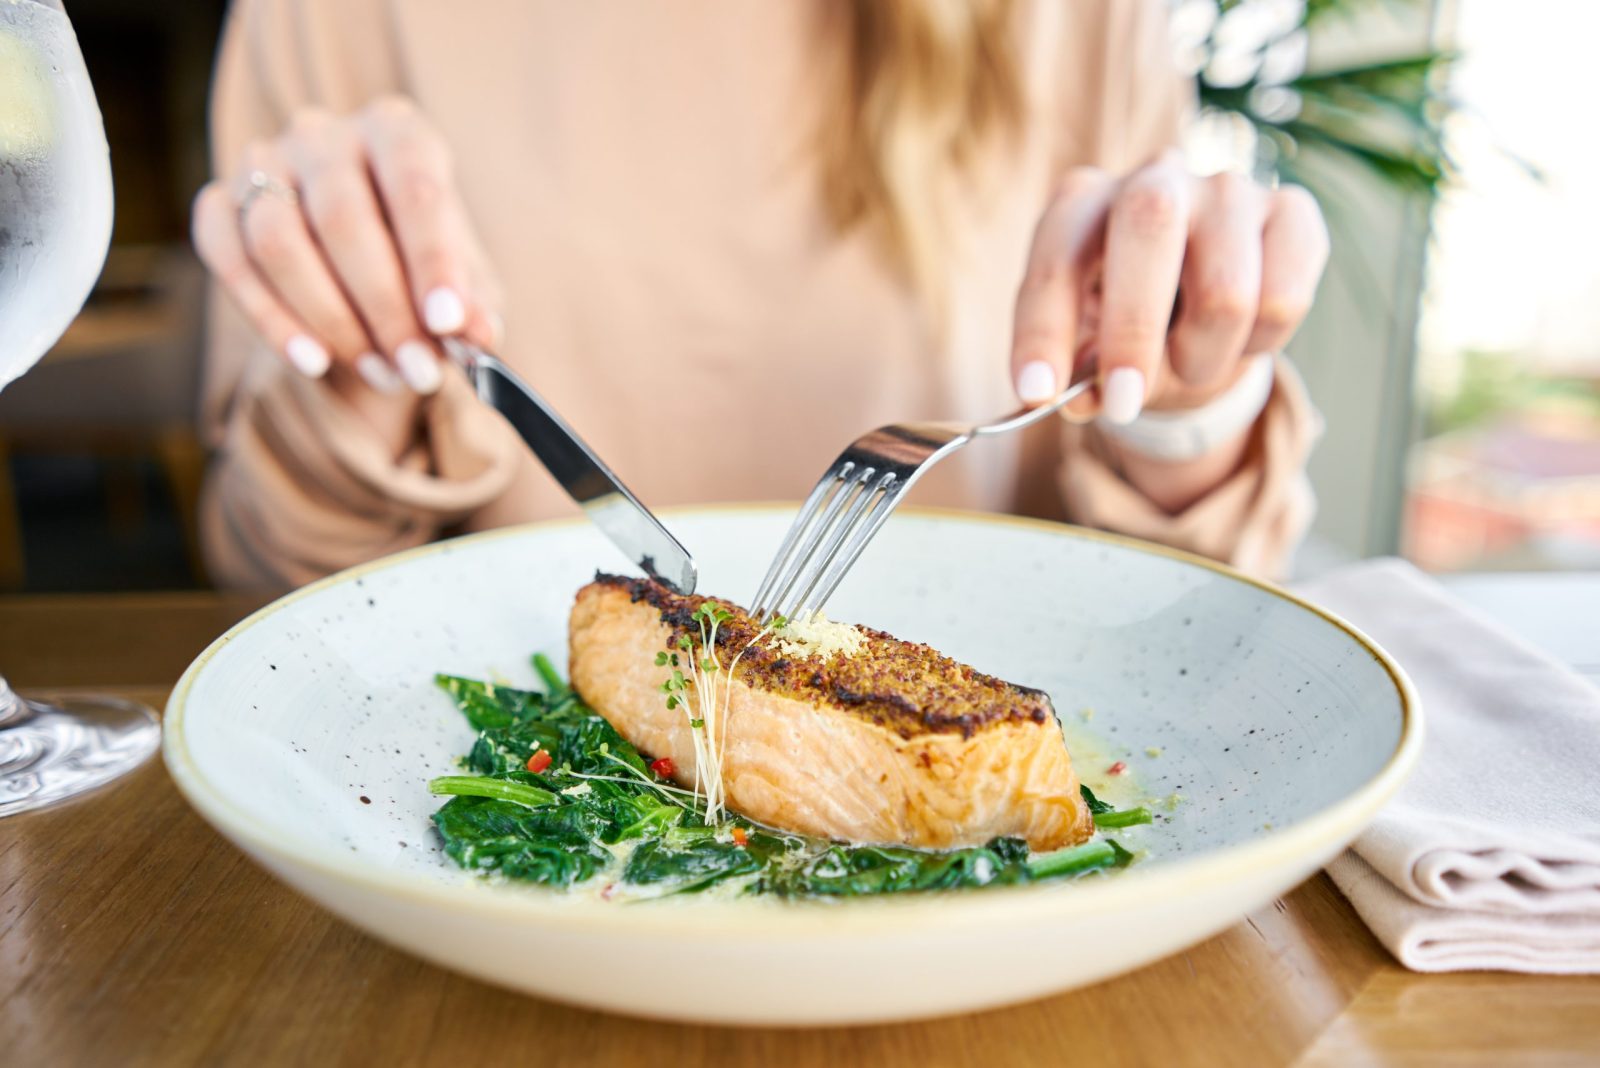 New Study Finds Link Between Eating Fish and Skin Cancer